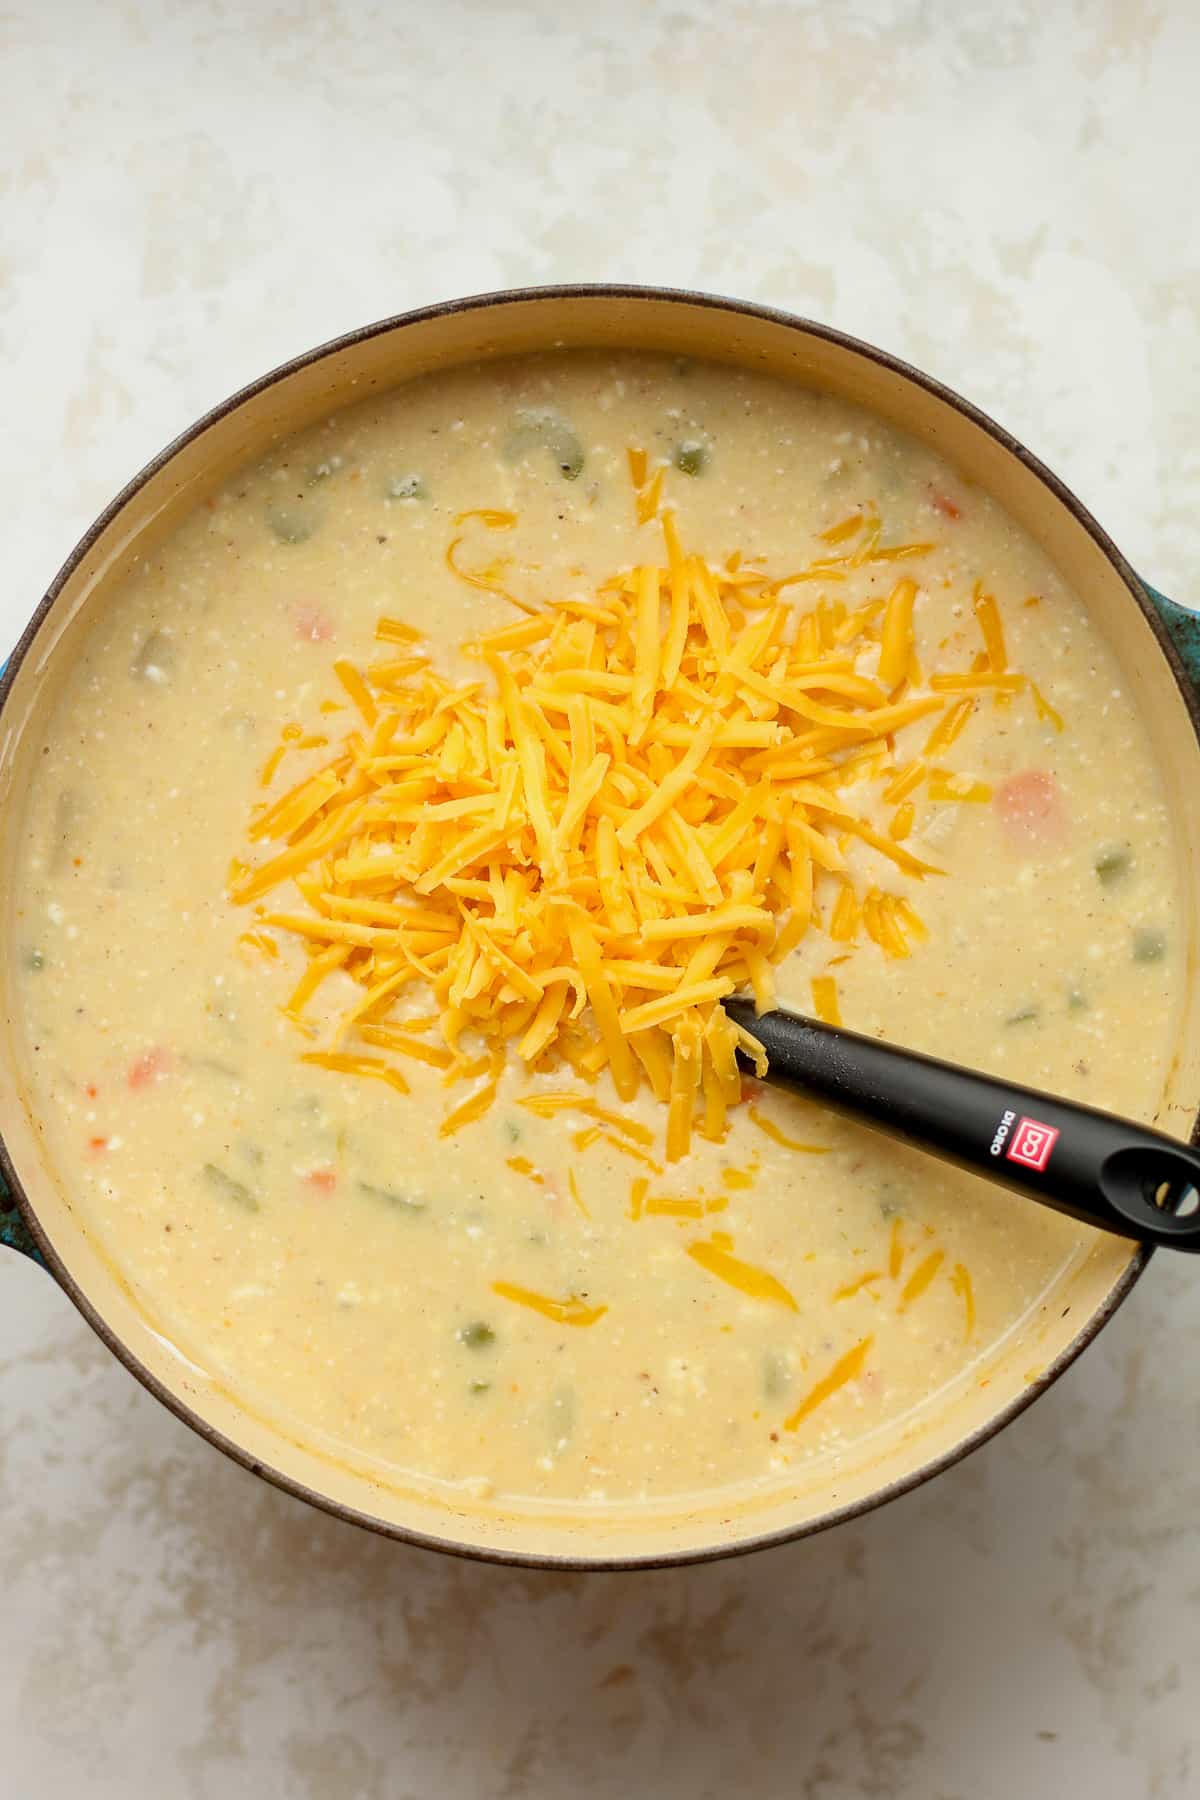 The pot of soup with the cheese on top.